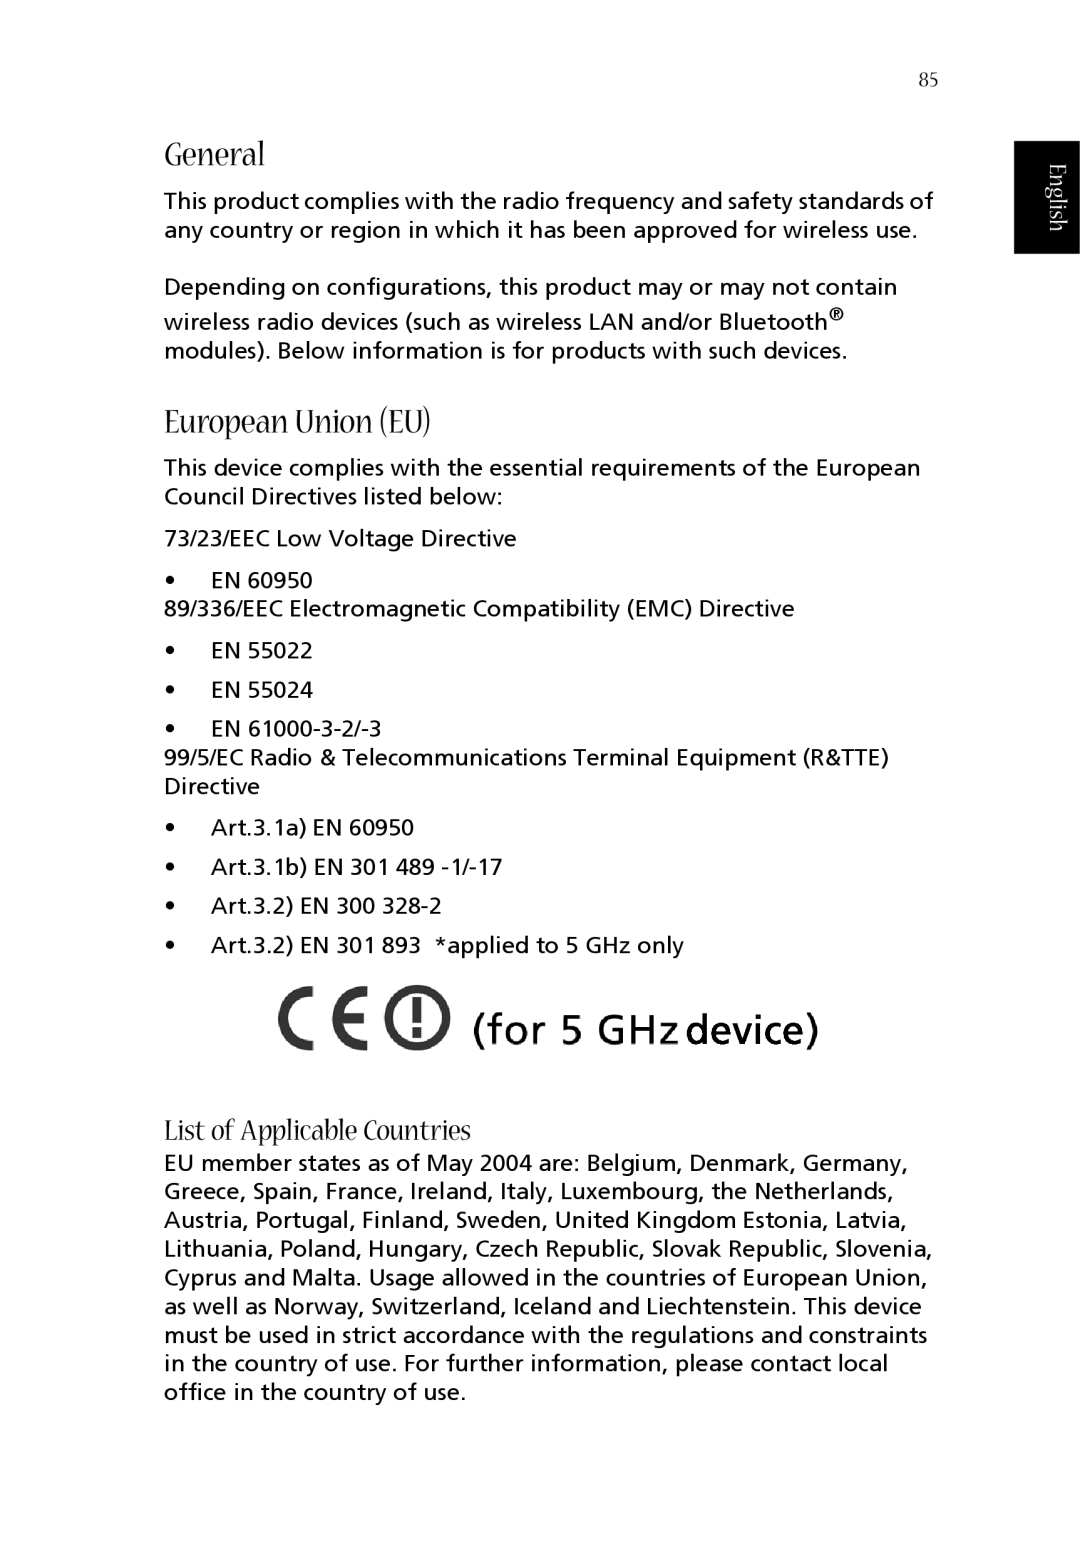 Acer 1360 manual General, European Union EU, List of Applicable Countries, English 